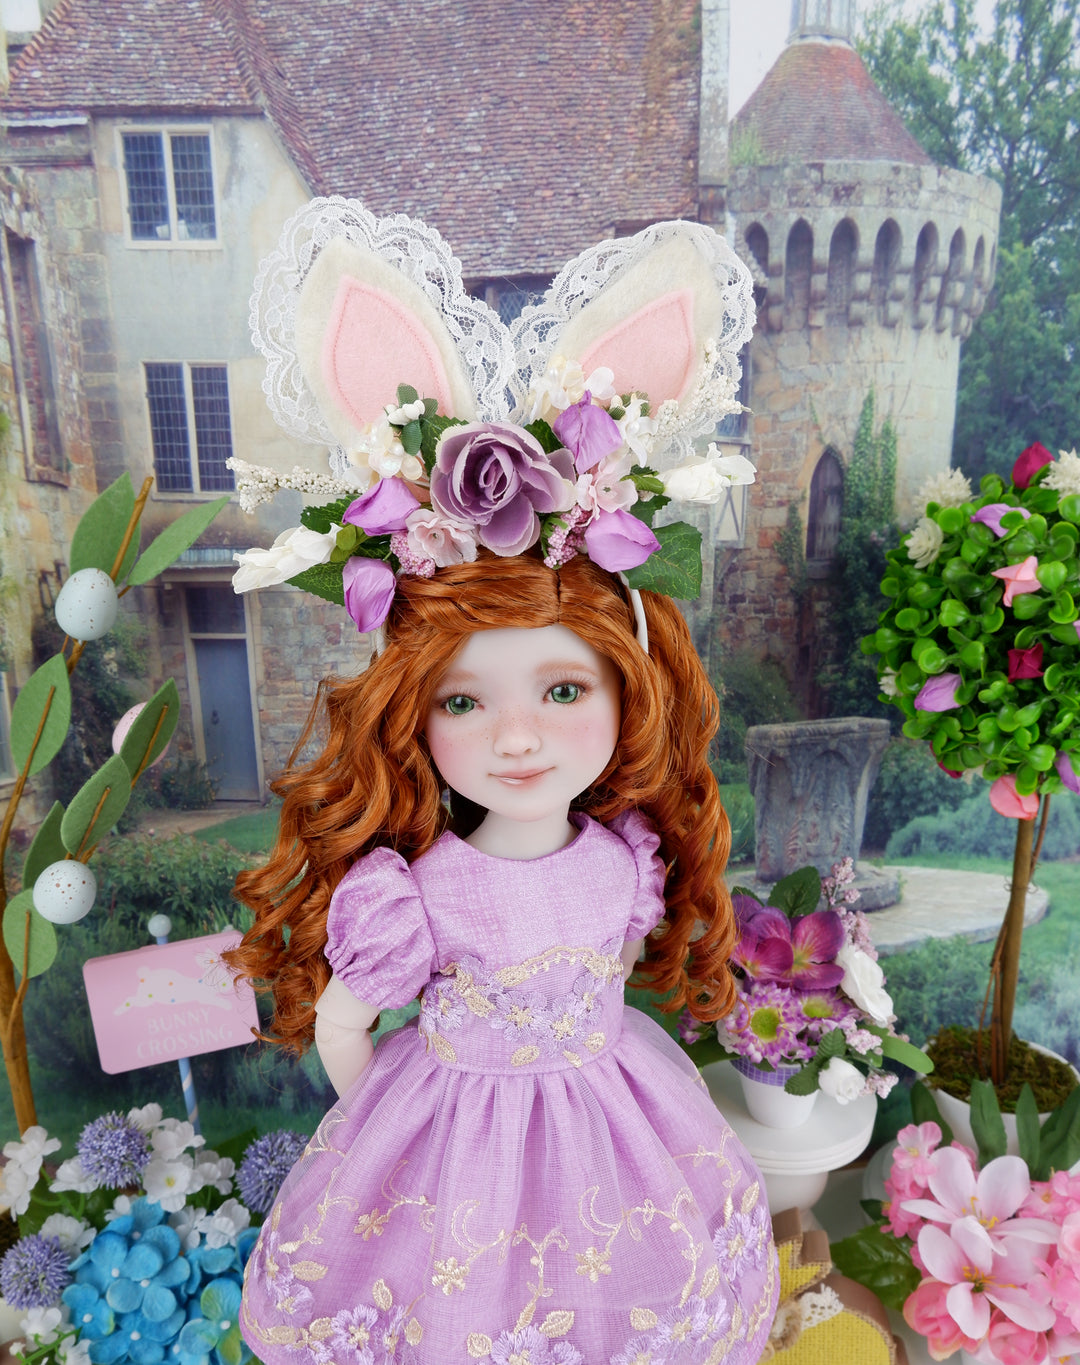 Elegant in Lilac - dress ensemble with shoes for Ruby Red Fashion Friends doll